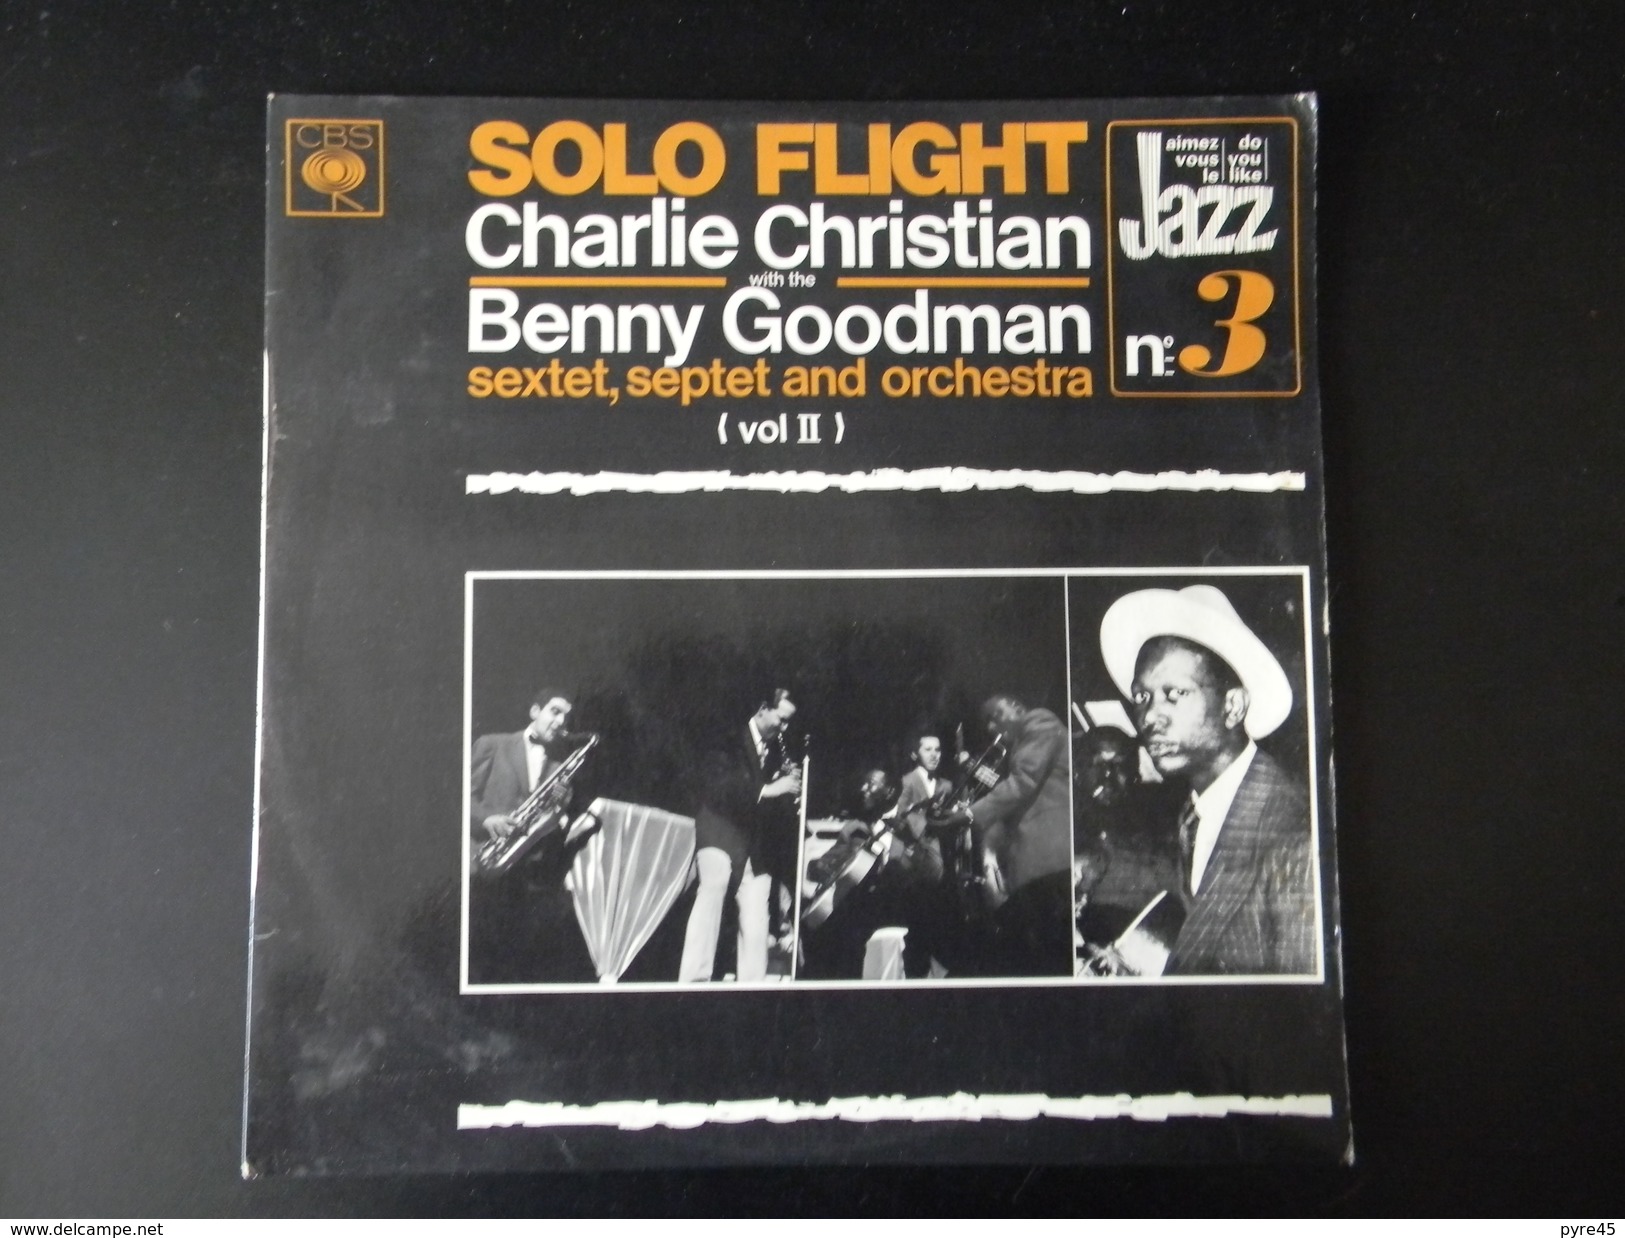 33 TOURS CHARLIE CHRISTIAN WITH THE BENNY GOODMAN SOLO FLIGHT CBS 62581 SOLO FLIGHT / ROSE ROOM + 14 - Jazz